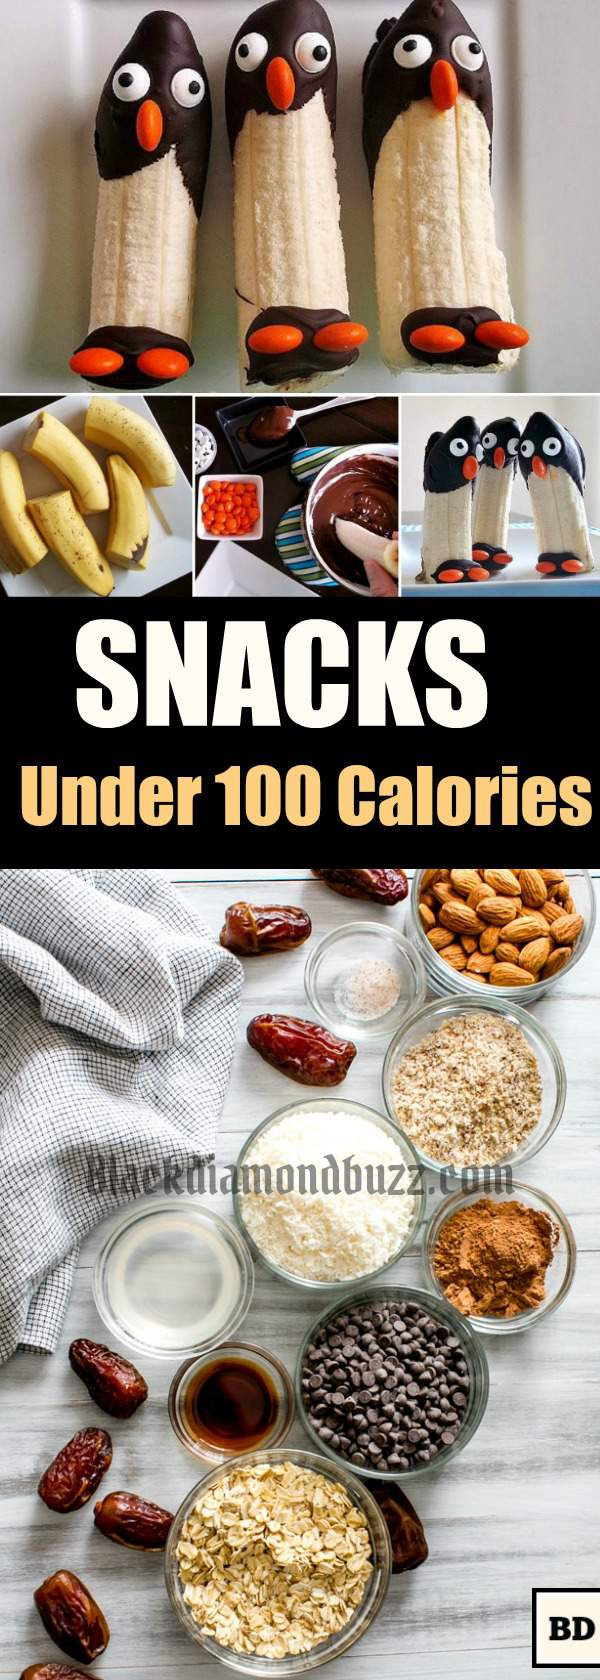 Low Calorie Healthy Snacks
 10 Best Easy Healthy Low Calorie Snacks for Weight Loss